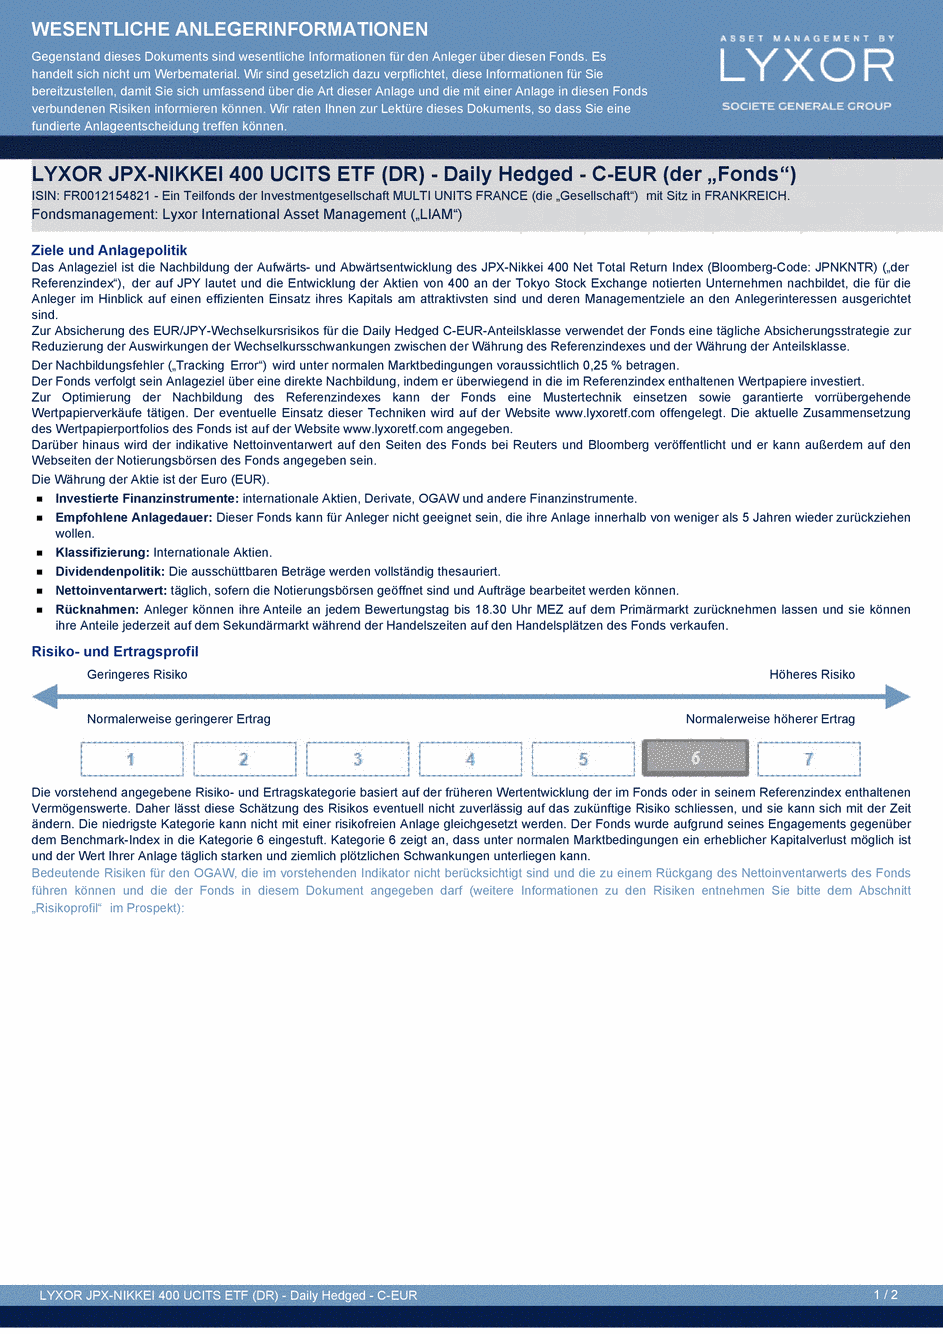 DICI LYXOR JPX-NIKKEI 400 UCITS ETF (DR) Daily Hedged C-EUR - 20/08/2015 - Allemand